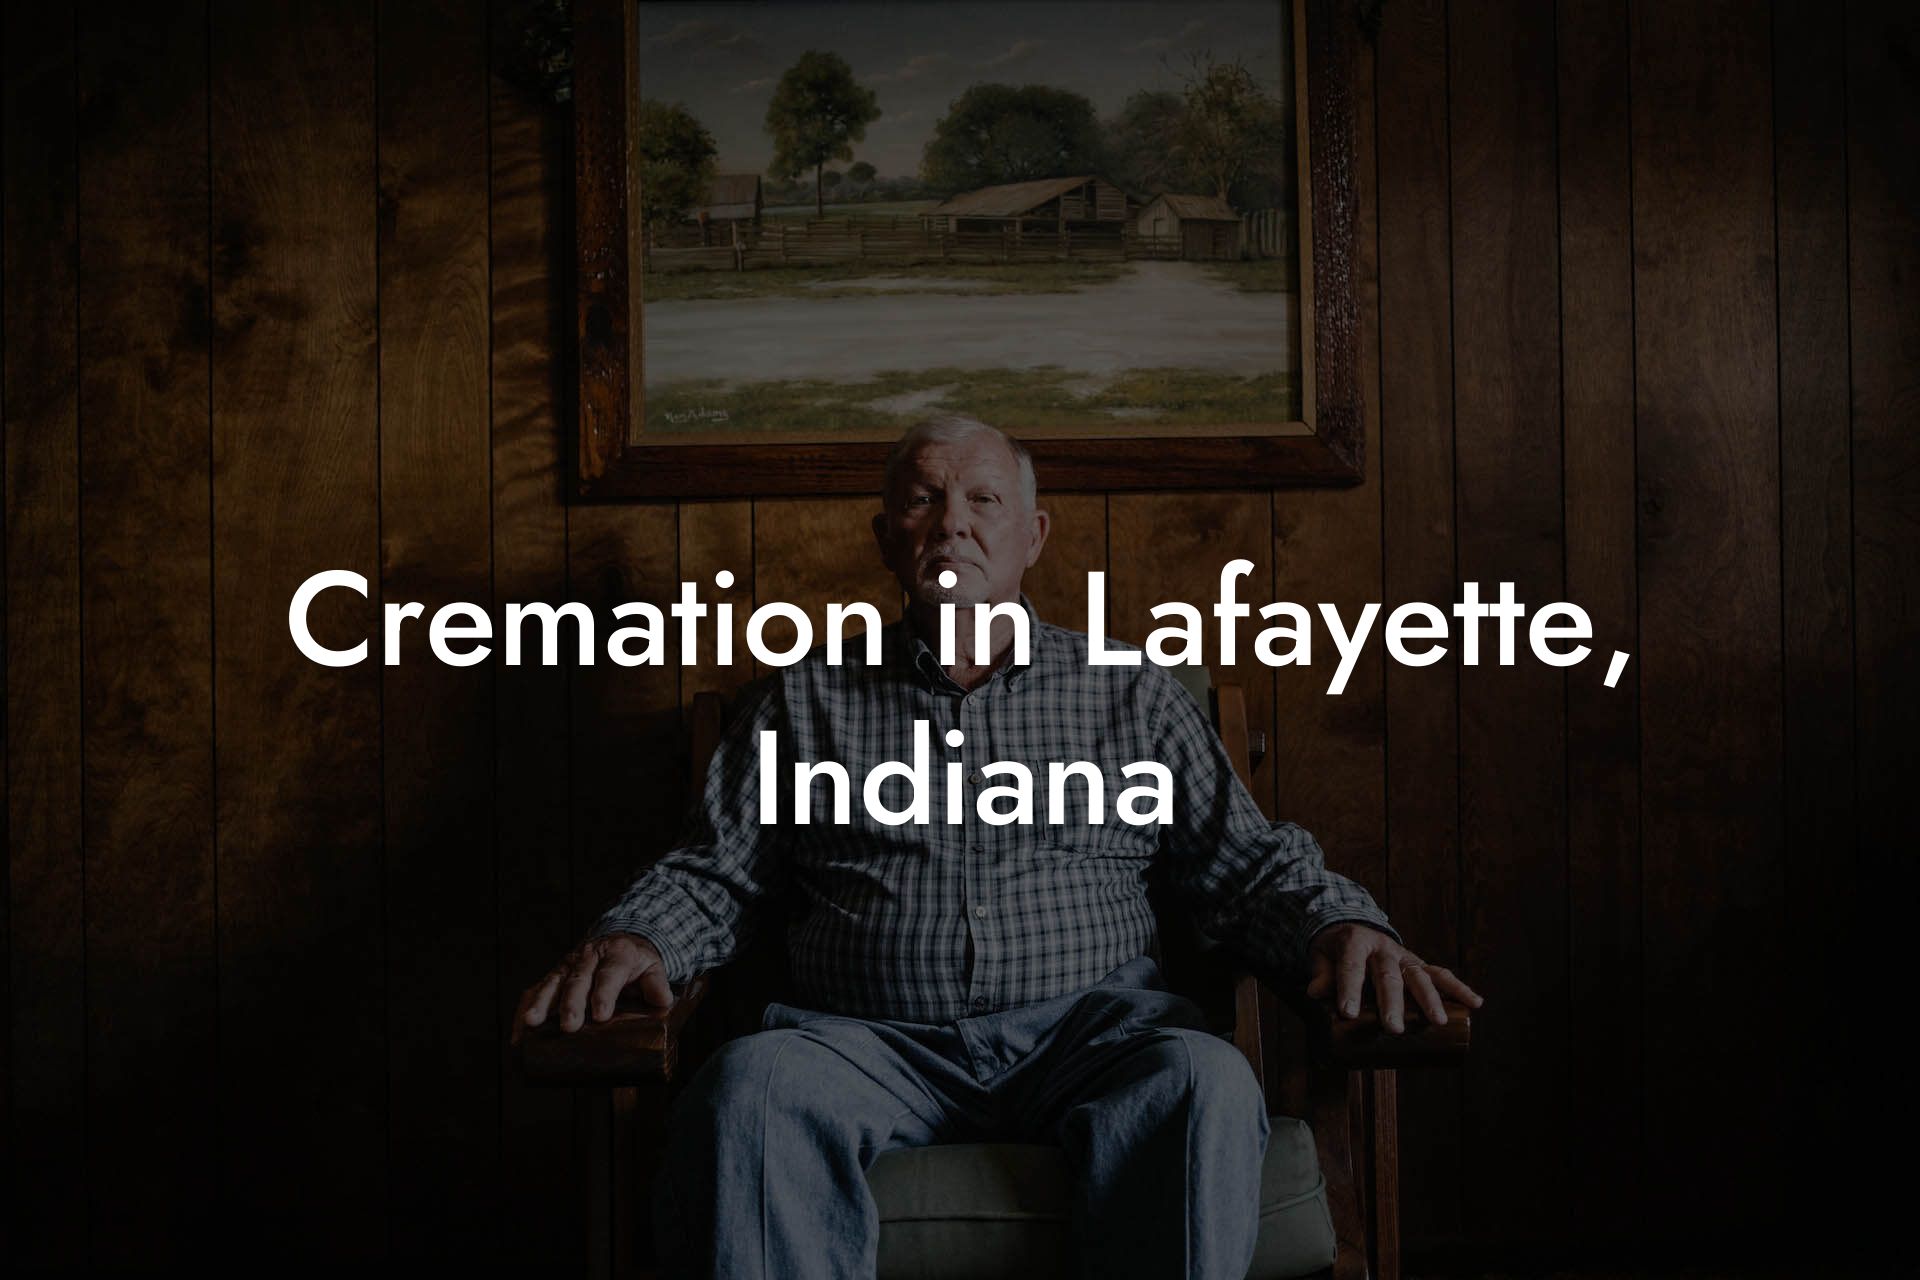 Cremation in Lafayette, Indiana